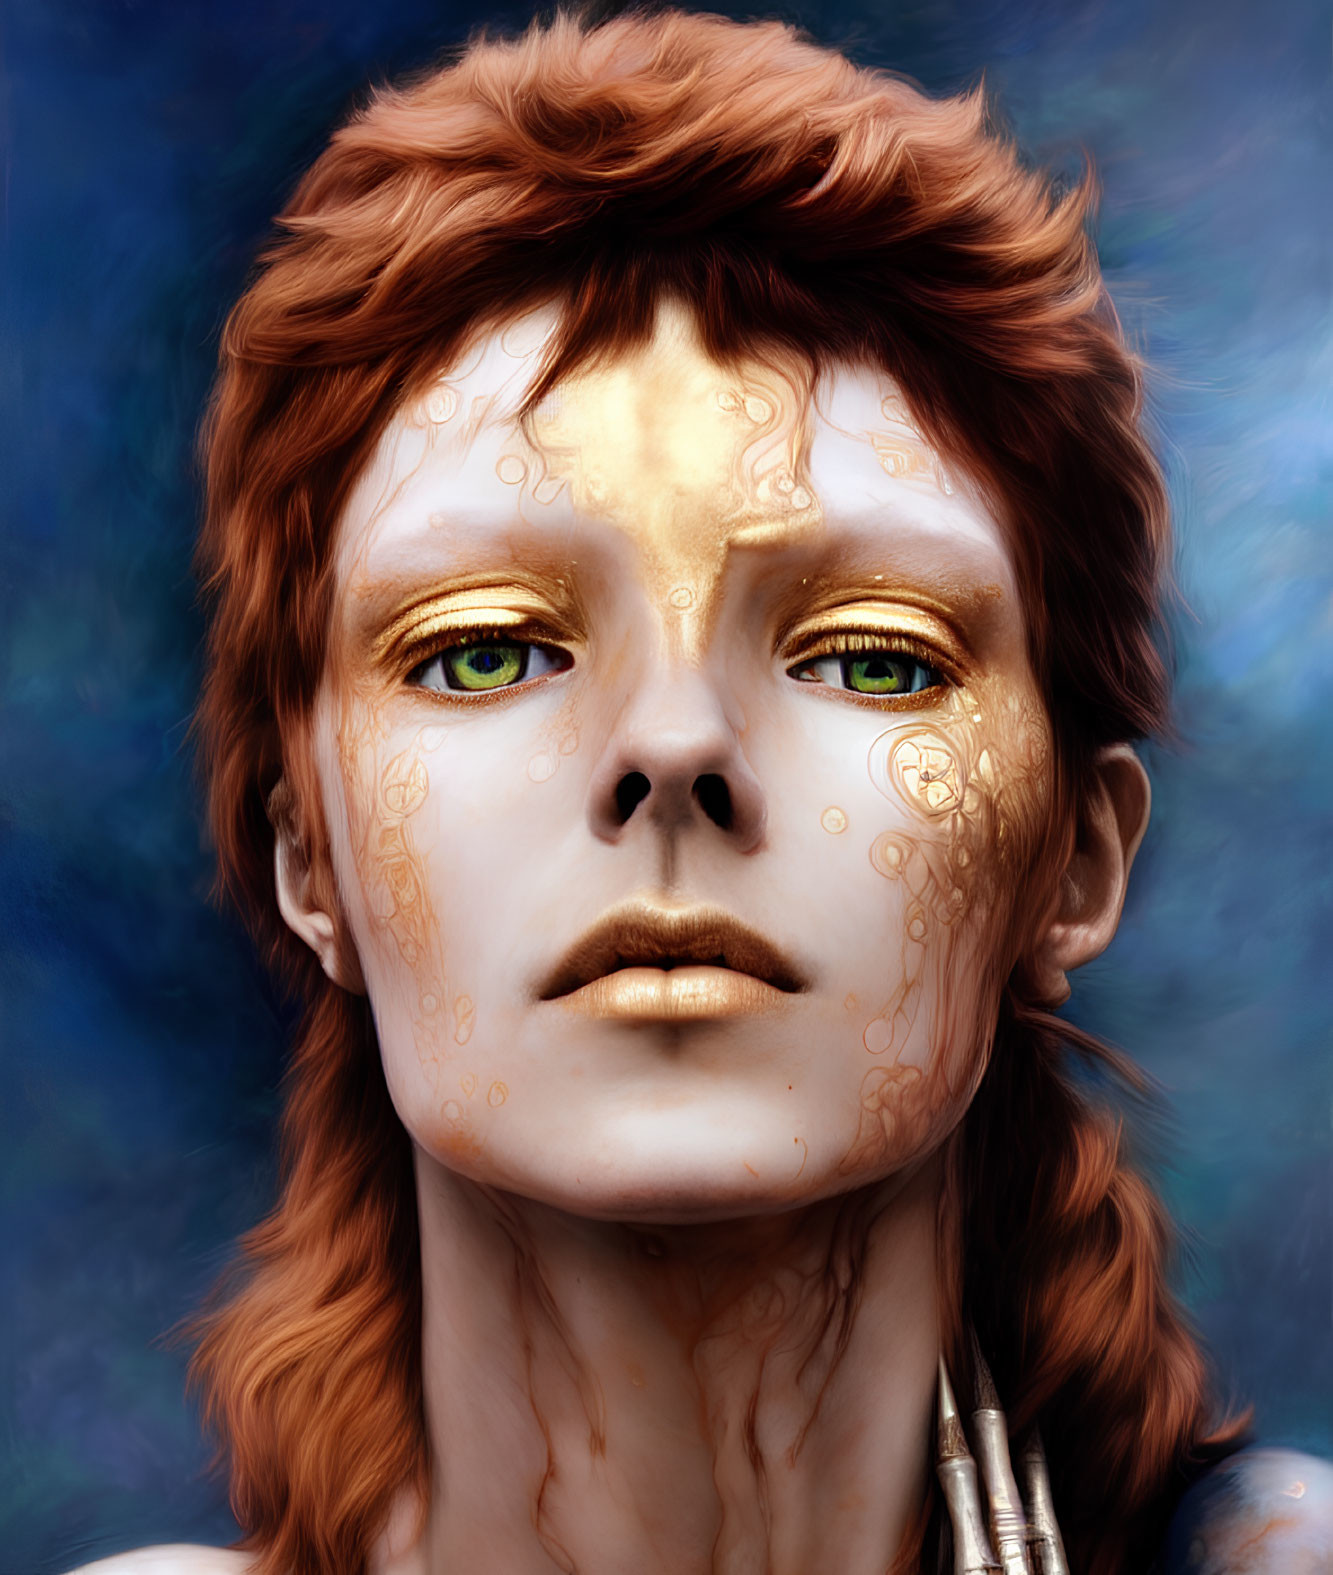 Digital portrait featuring person with red hair, green eyes, golden skin patterns, on blue backdrop